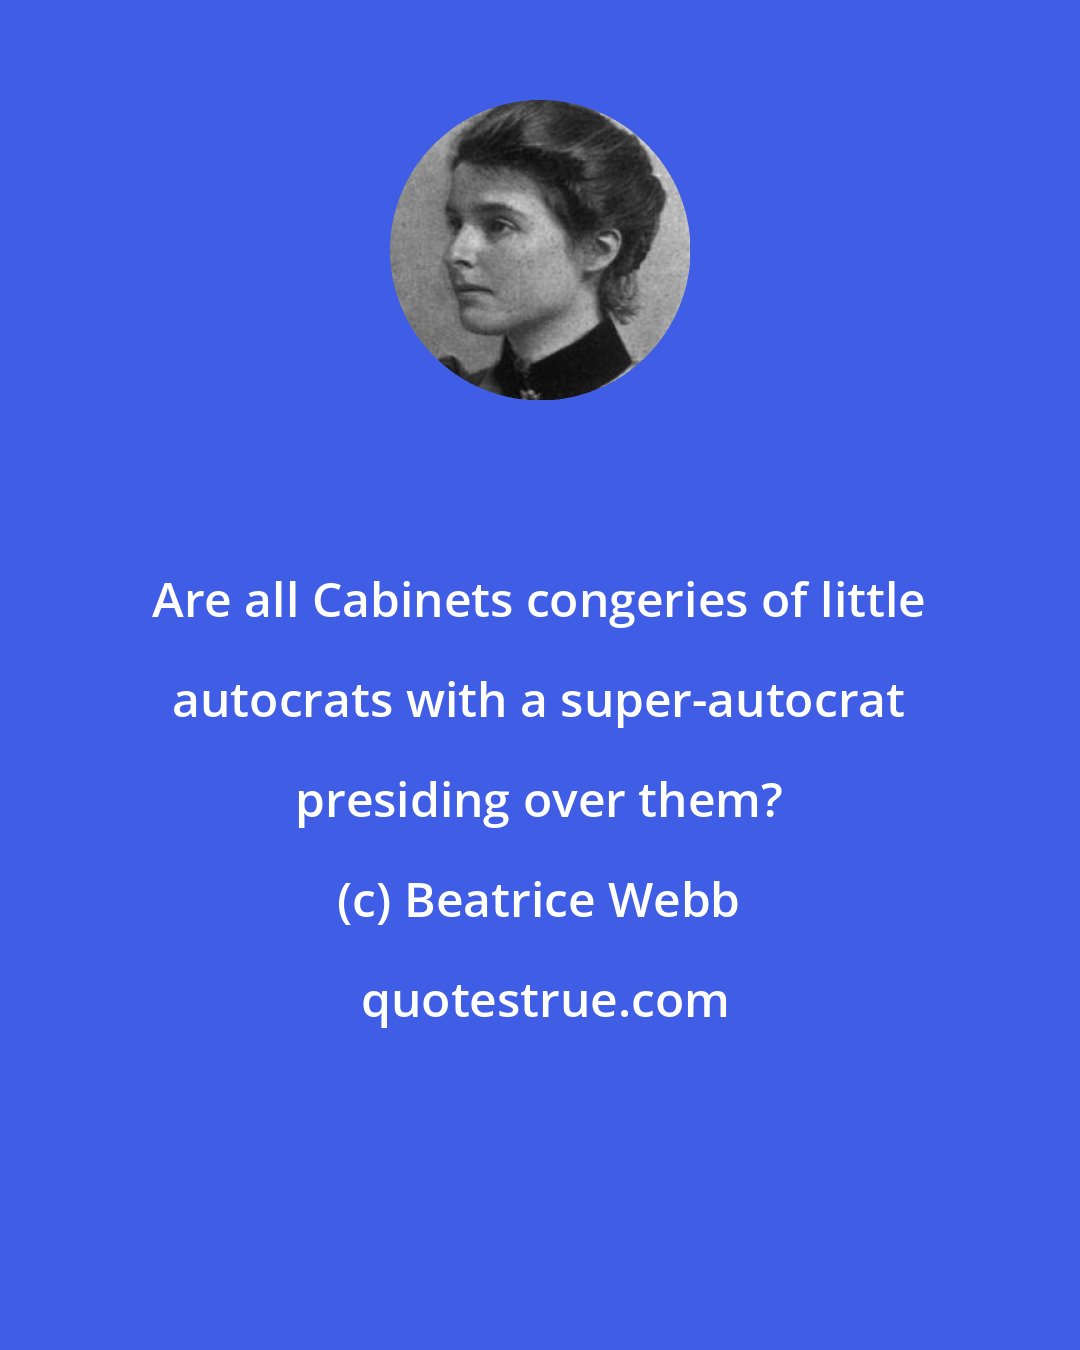 Beatrice Webb: Are all Cabinets congeries of little autocrats with a super-autocrat presiding over them?